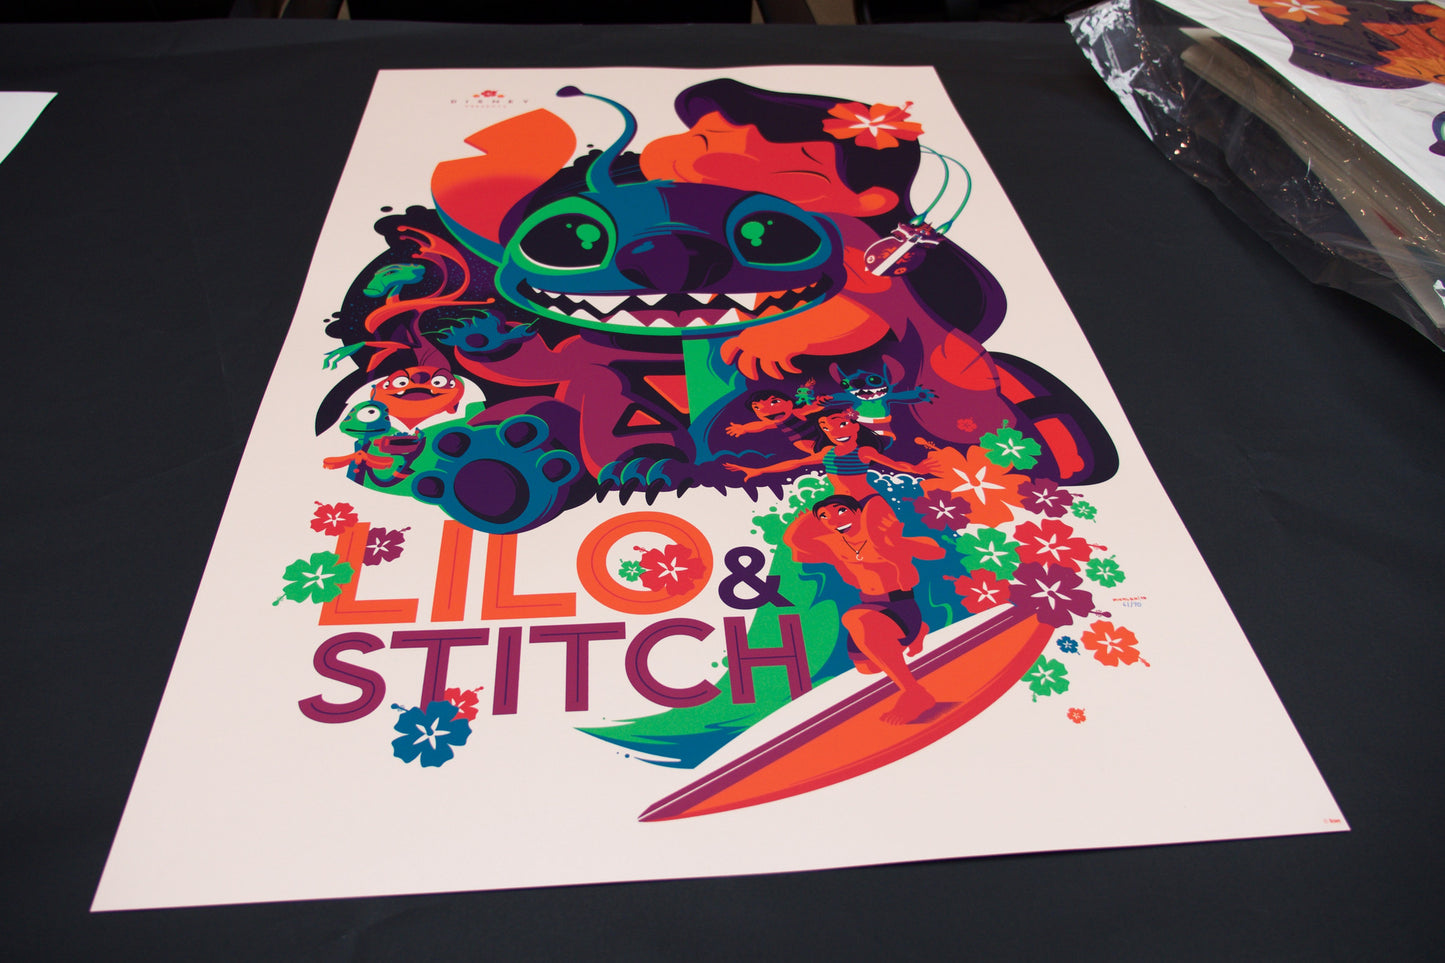 Cyclops Print Works Print #04V: Lilo & Stitch Sunset Variant Edition by Tom Whalen